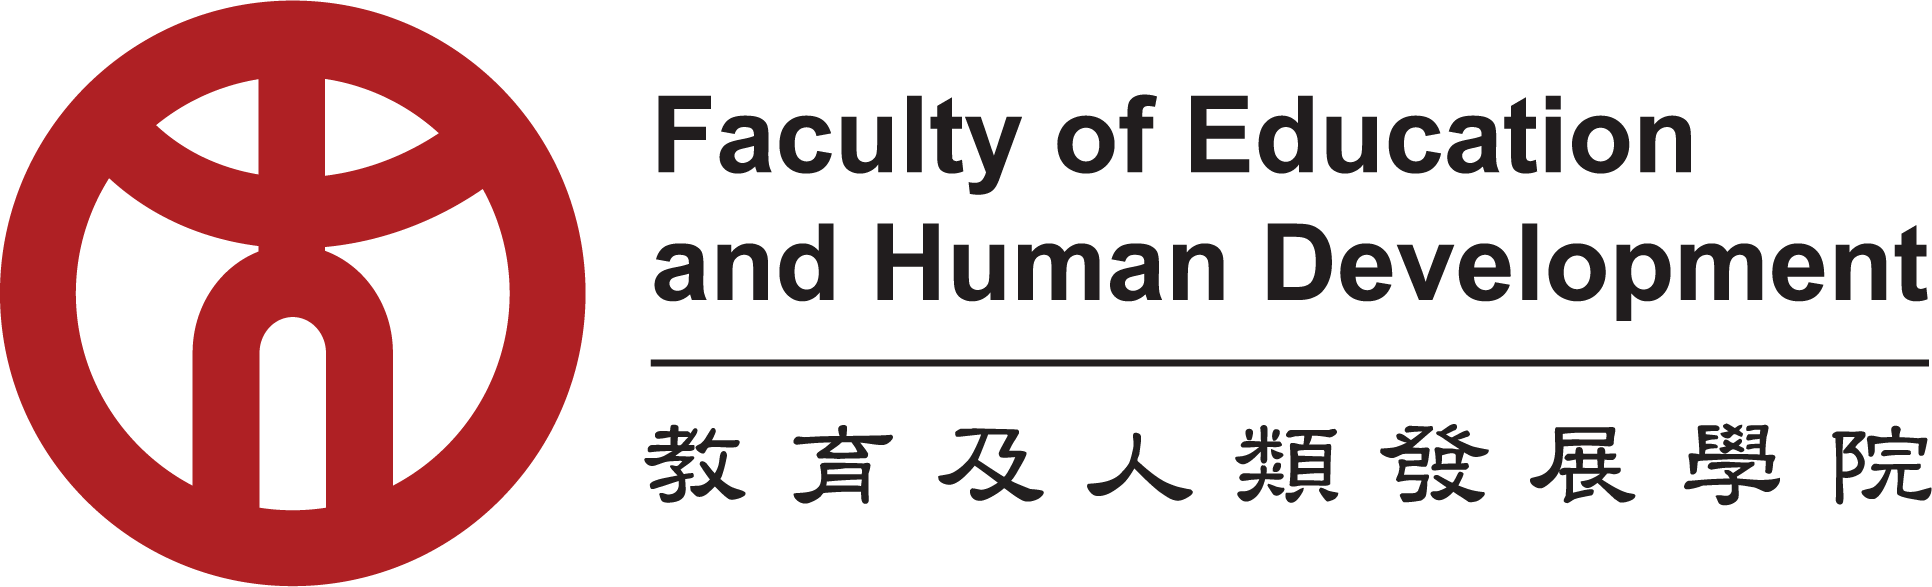 Faculty of Education and Human Development 